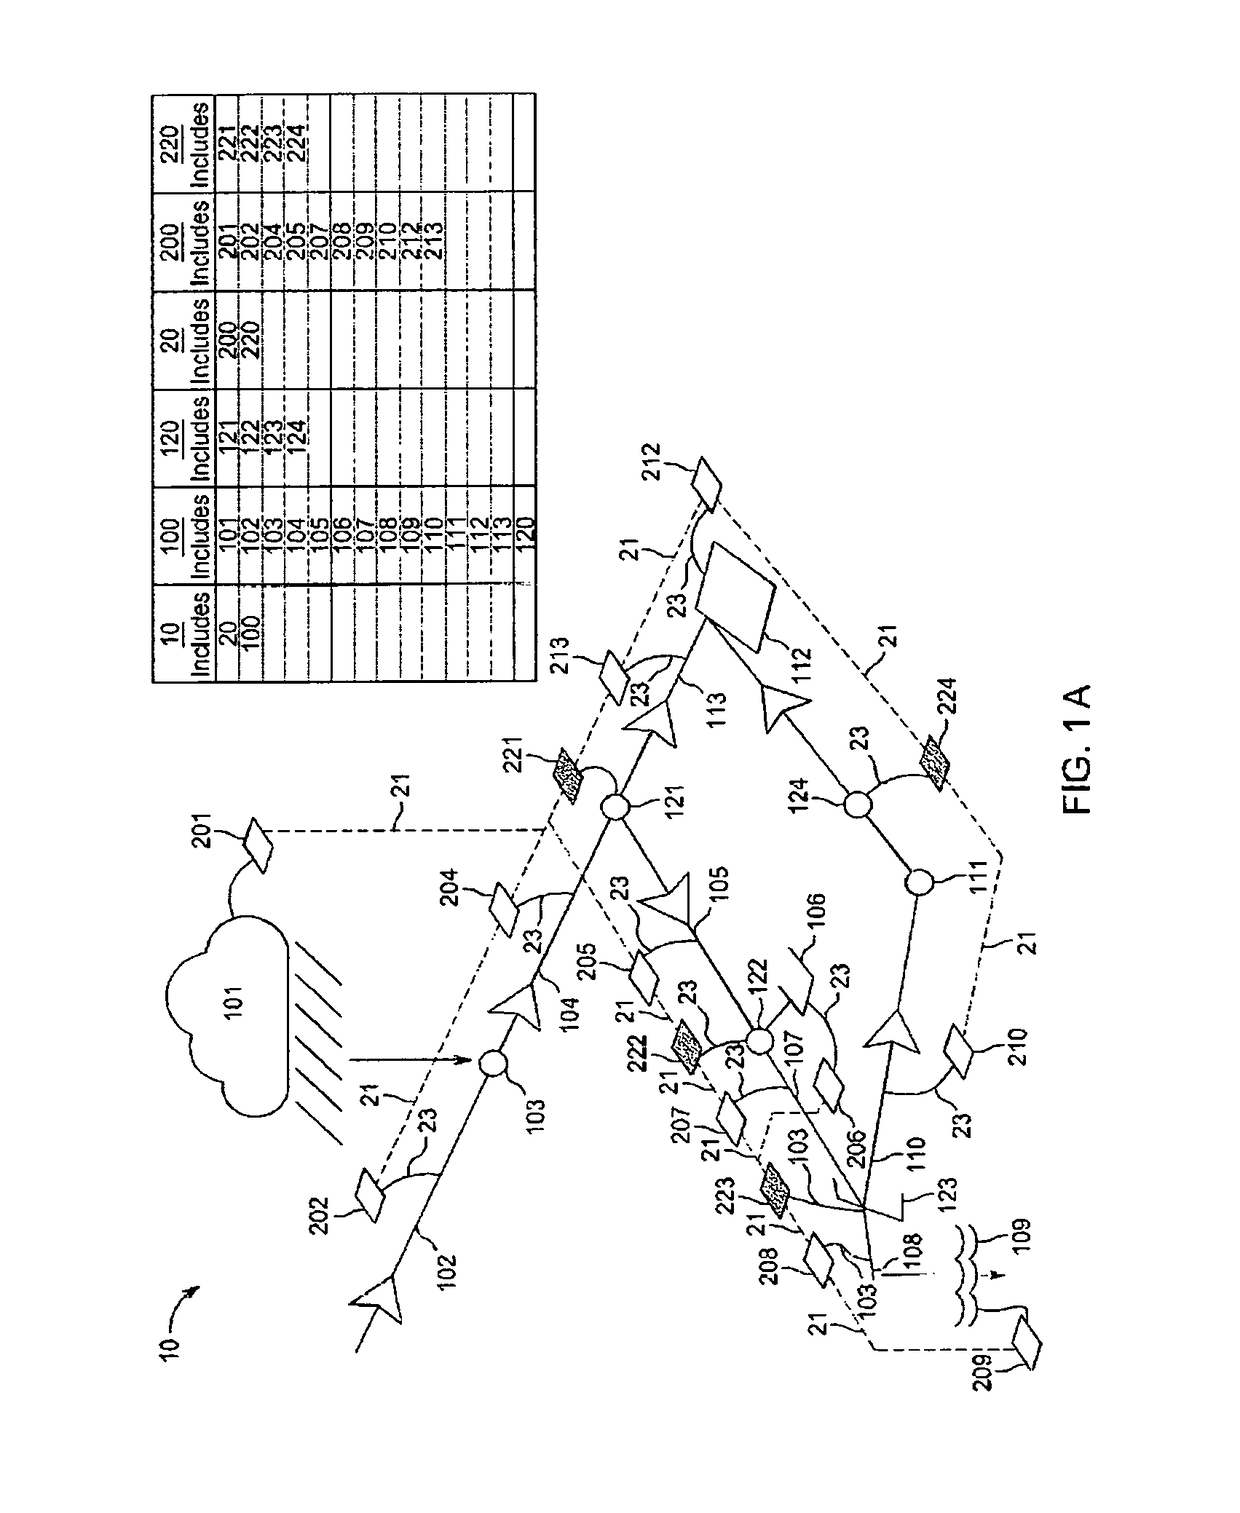 System and method for agent-based control of sewer infrastructure